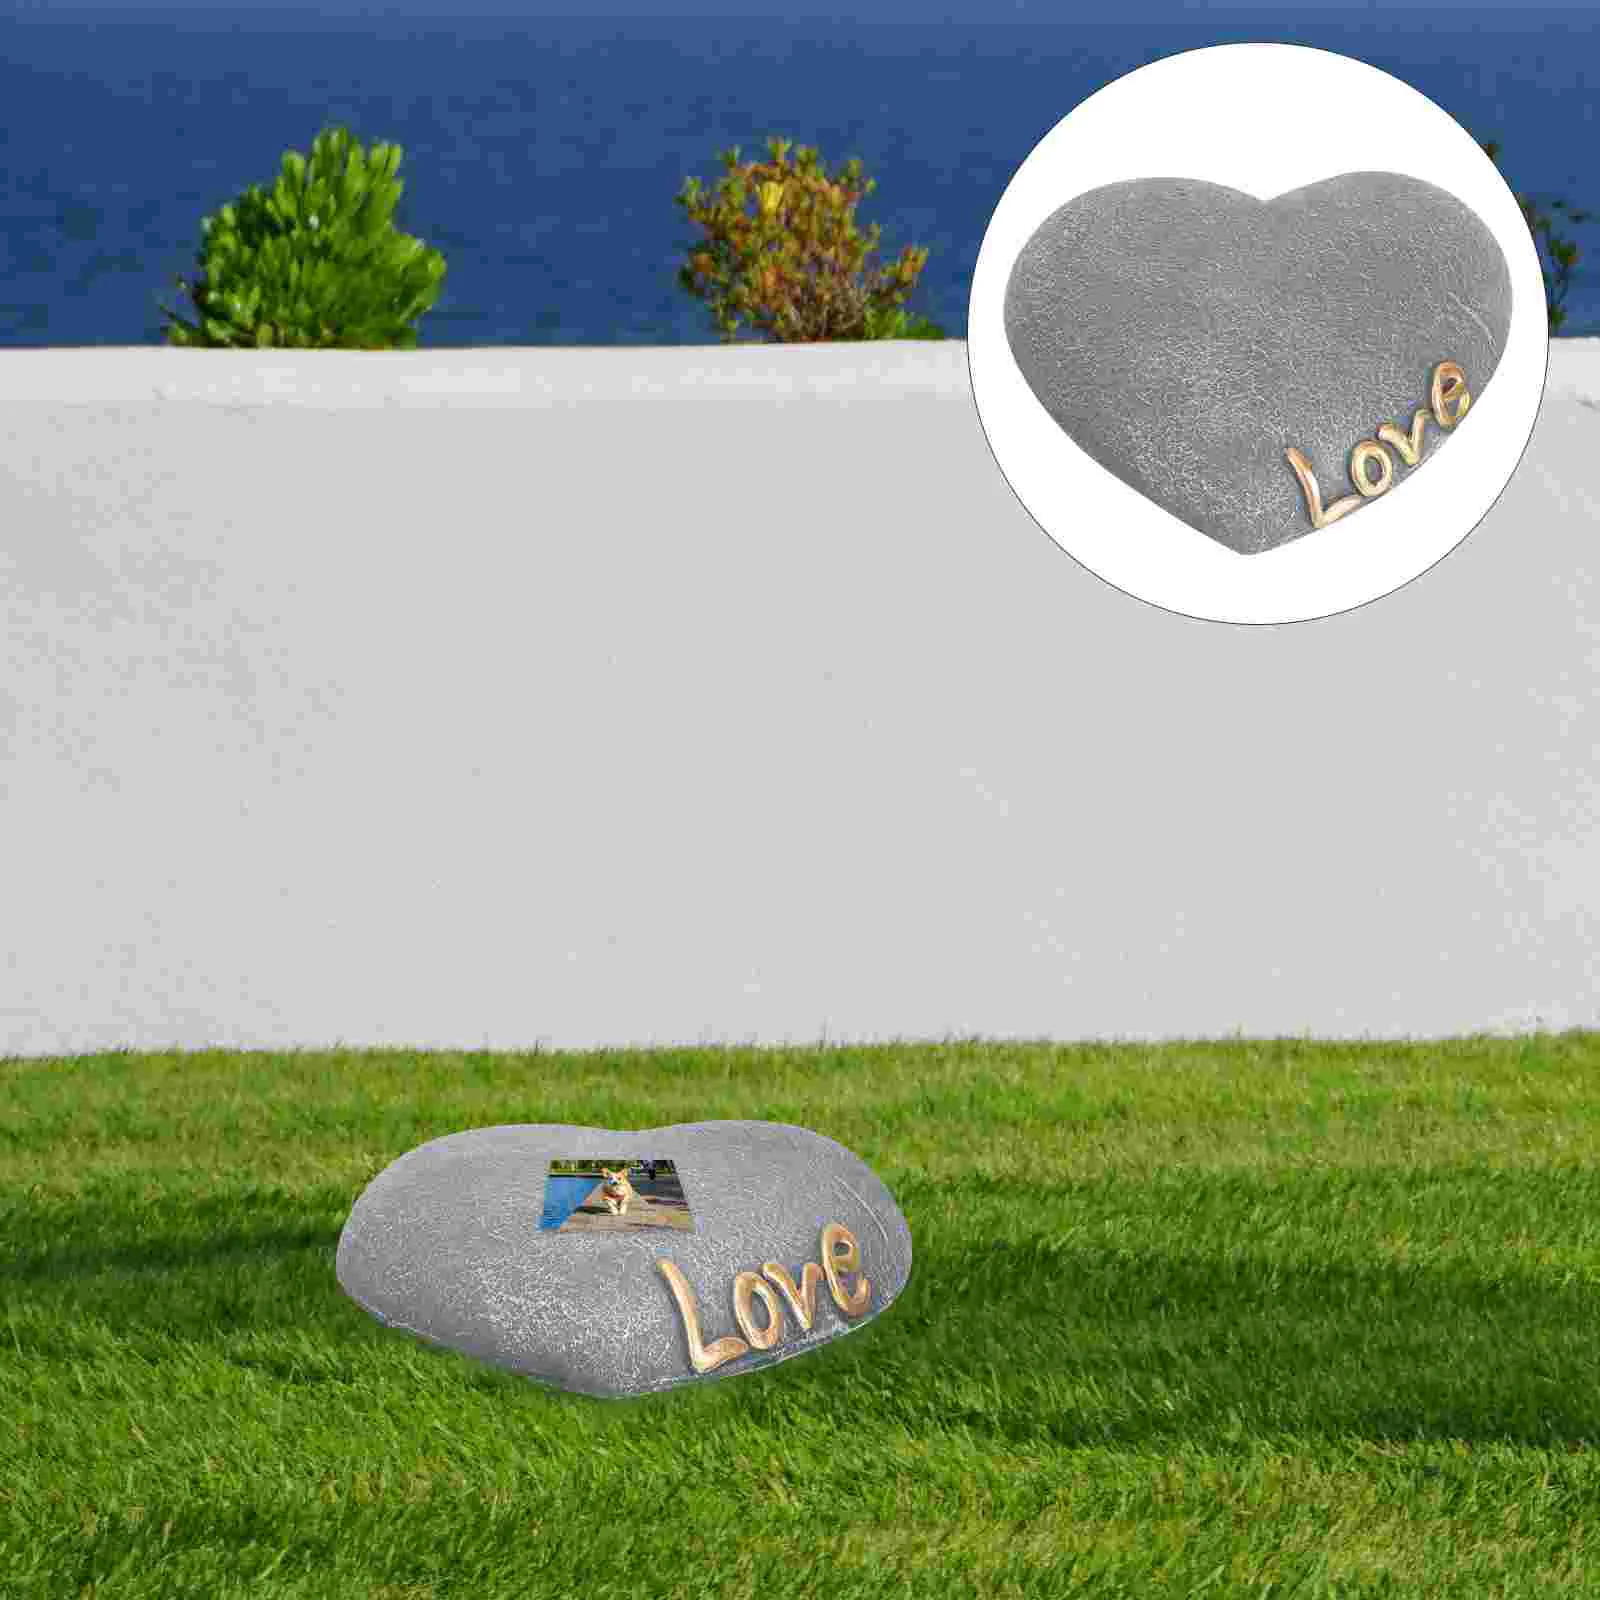 

Dog Stone Memorial Pet Grave Markers Cat Stones Bandanas Garden Boy Tombstone Burial Gifts Loss Remembered Sympathy Headstone